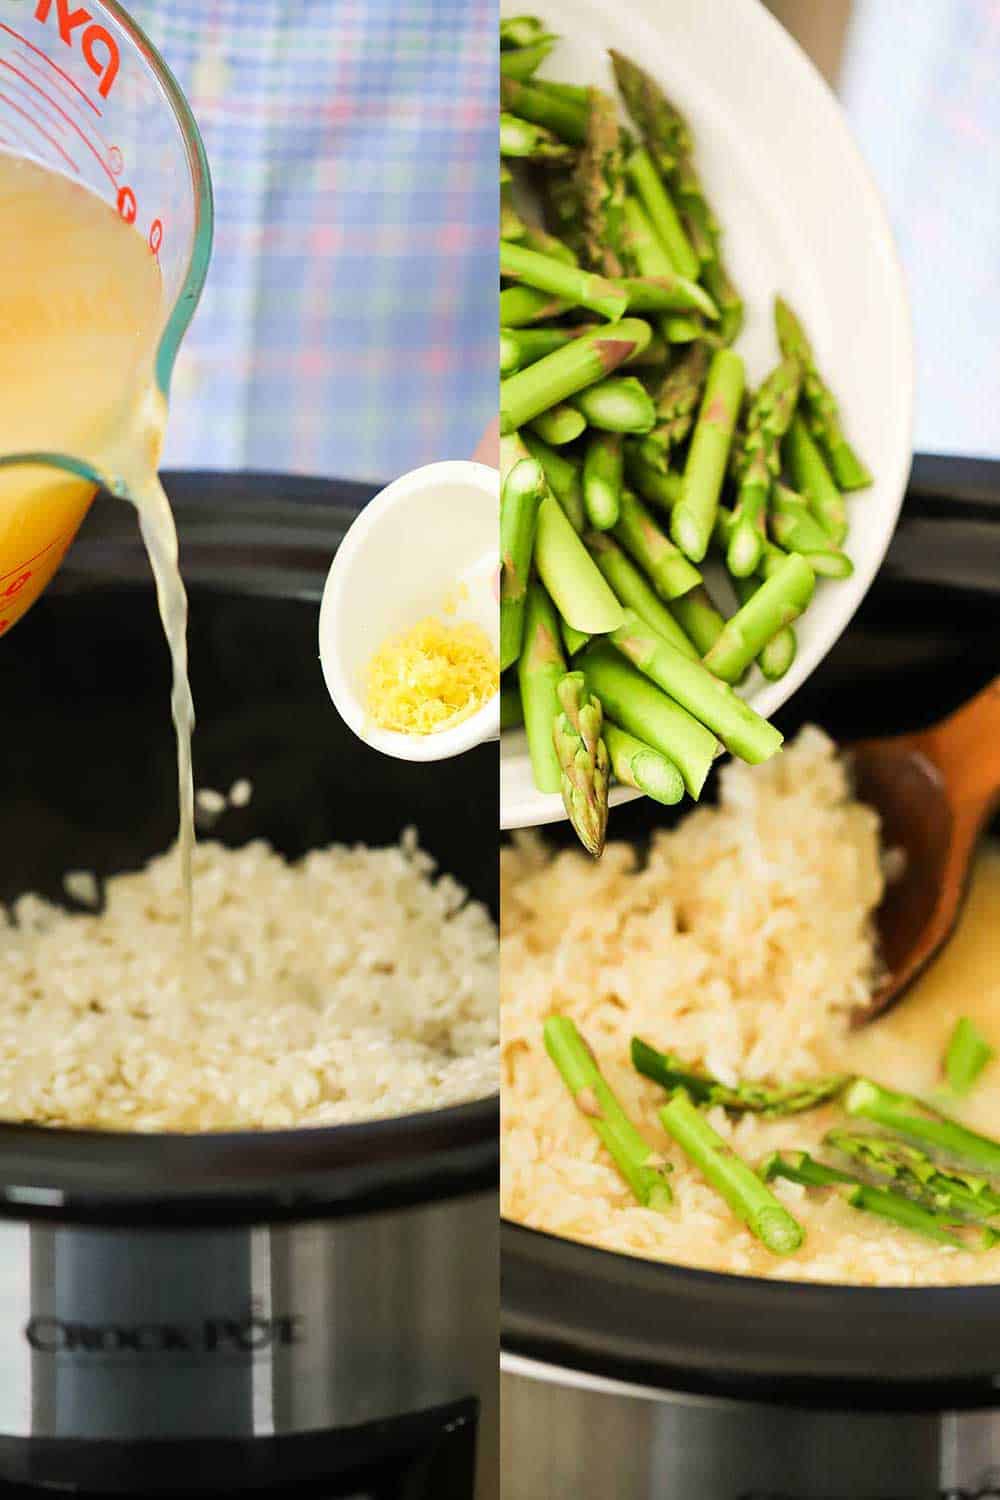 Two side-by-side images with the first being a hand pouring chicken stock into a slow cooker from a measuring cup, and the next cut asparagus being dropped into the same slow cooker. 